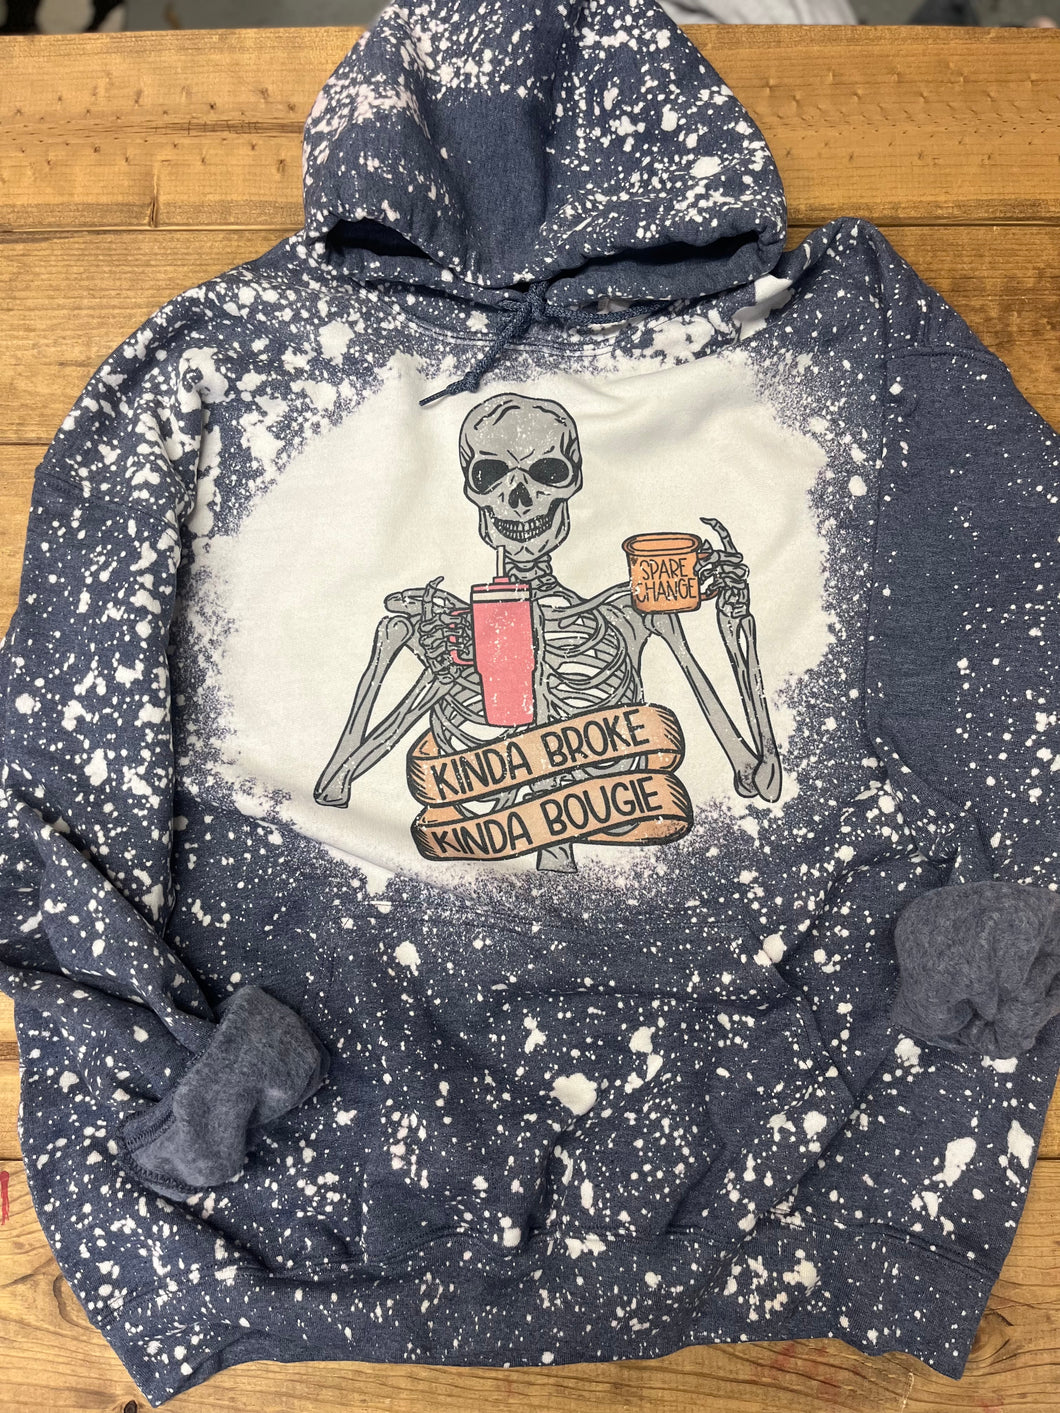 SIZE XL ready to ship kind of broke kind of bougie navy hoodie￼